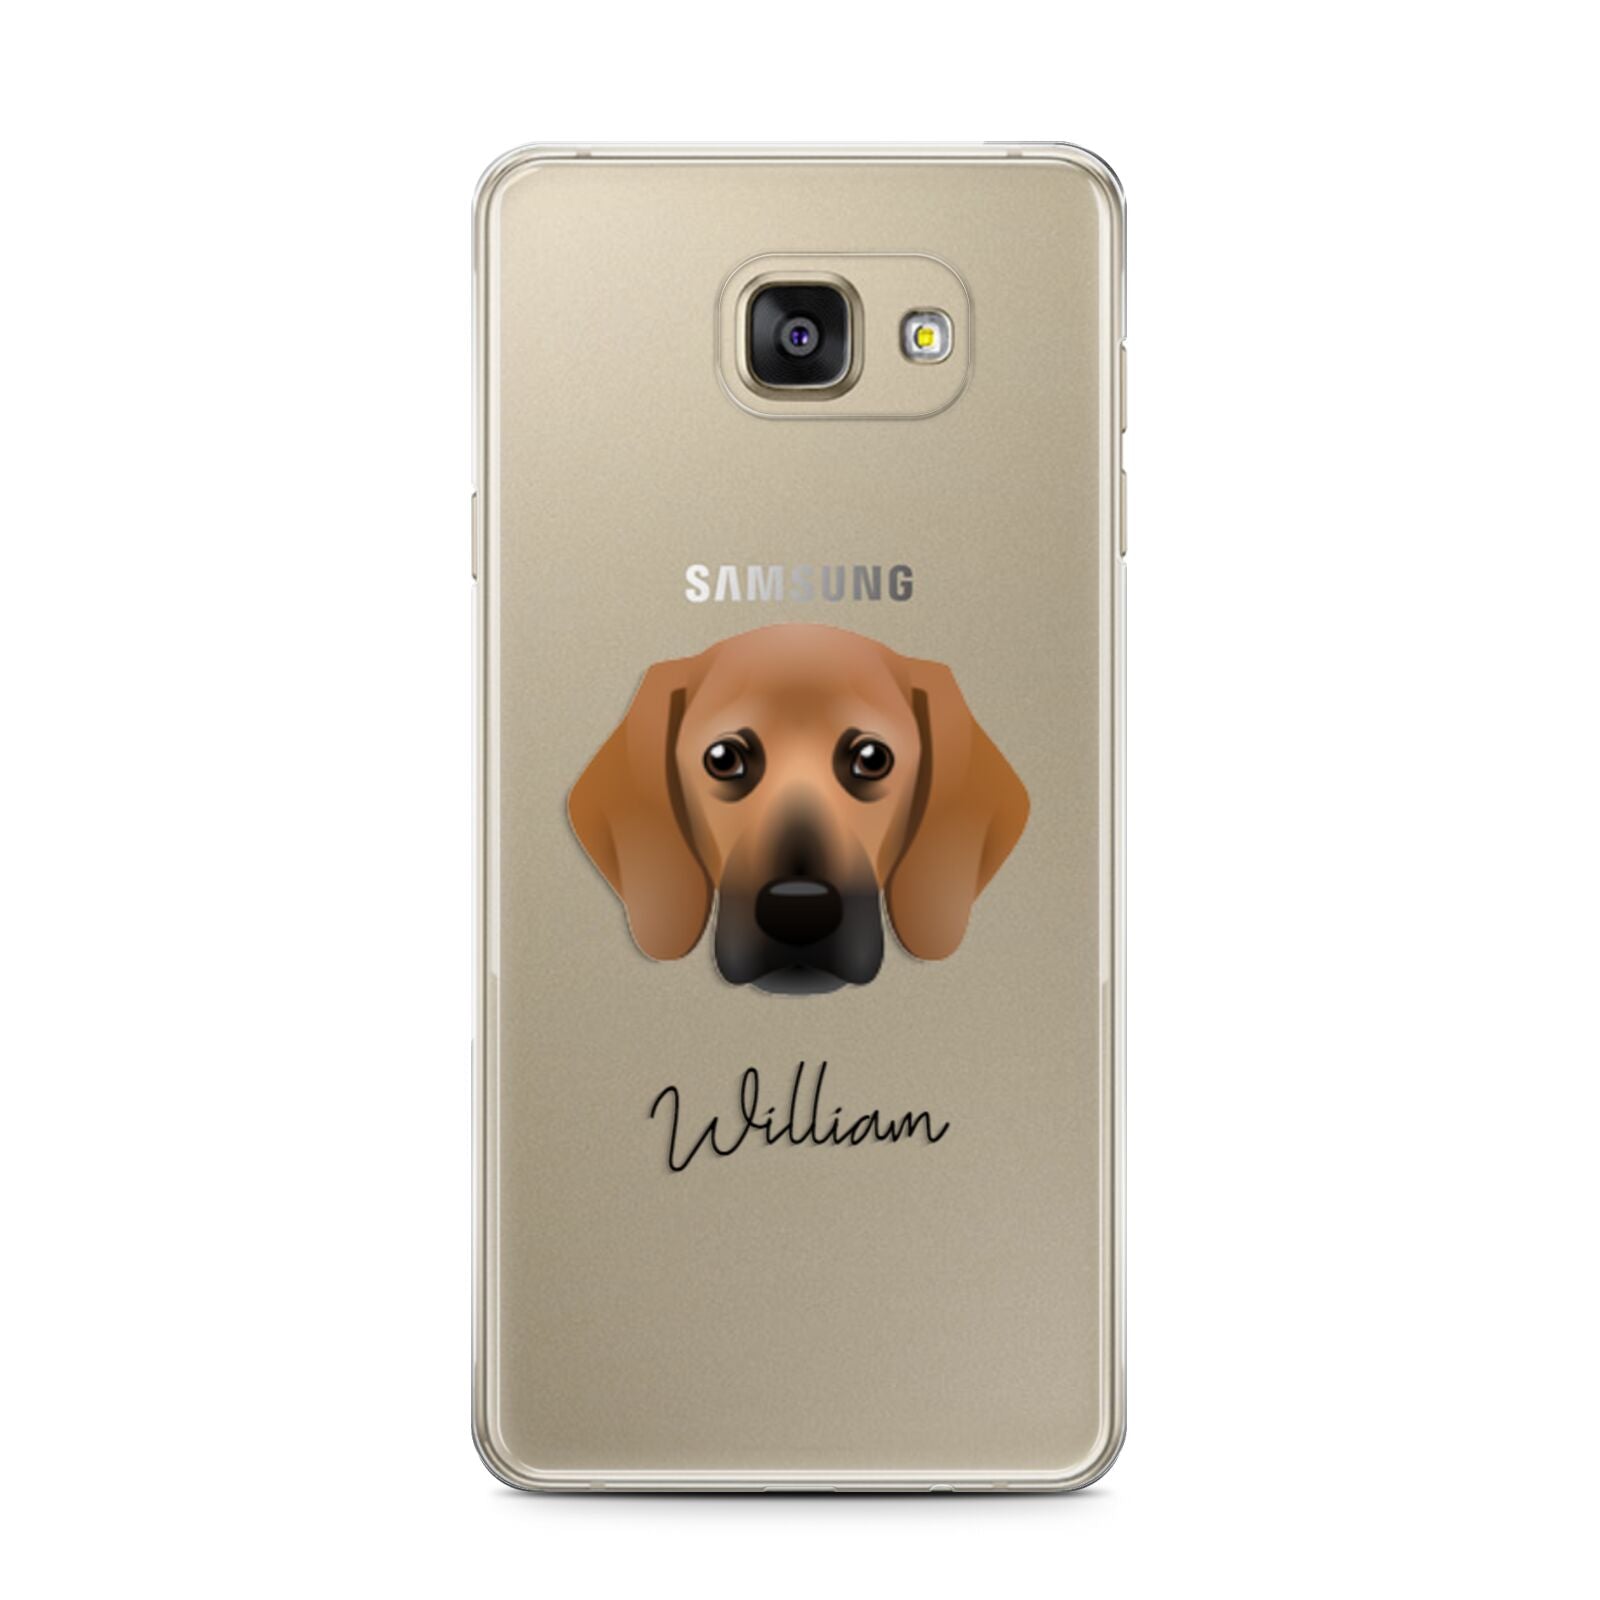 Bassugg Personalised Samsung Galaxy A7 2016 Case on gold phone